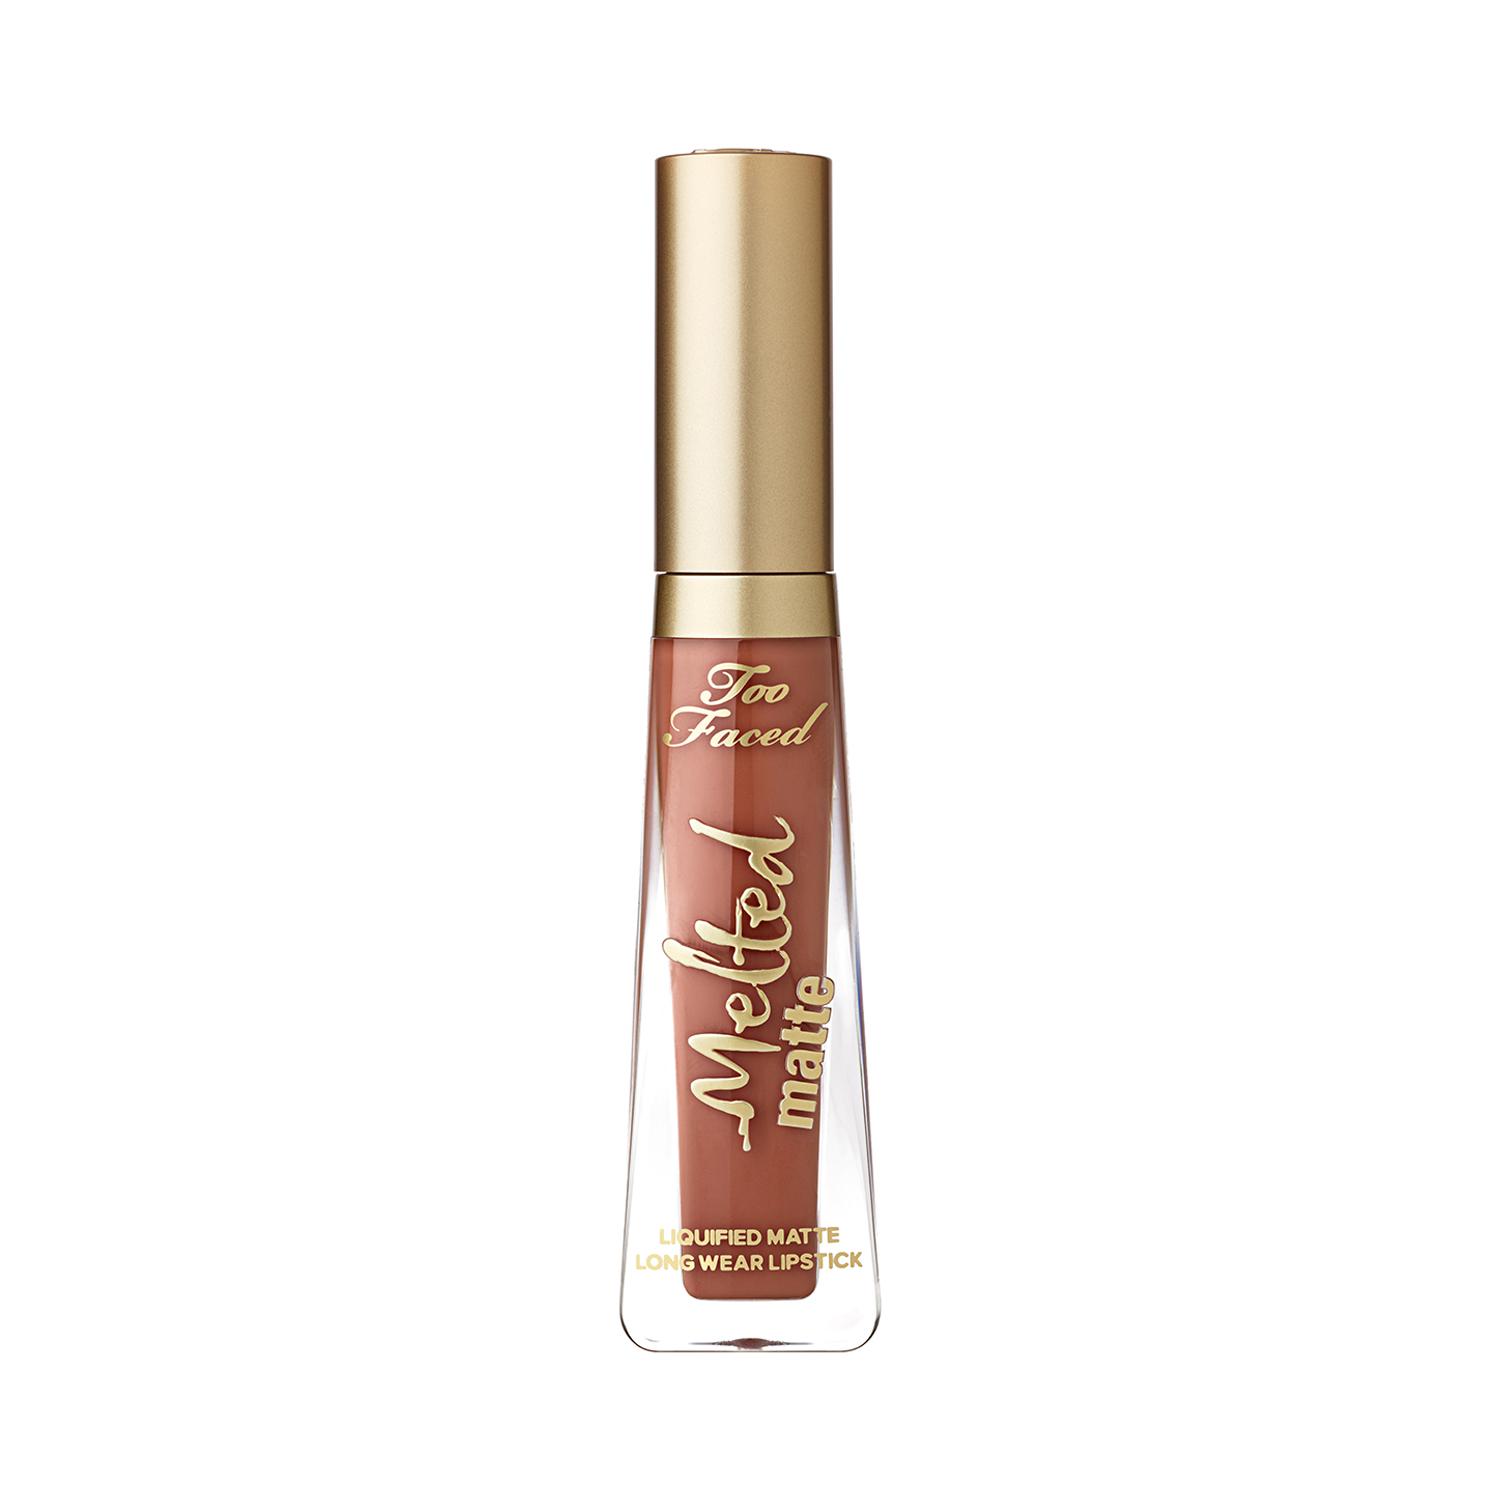 Too Faced | Too Faced Melted Matte Lipstick - Makin' Moves (7ml)